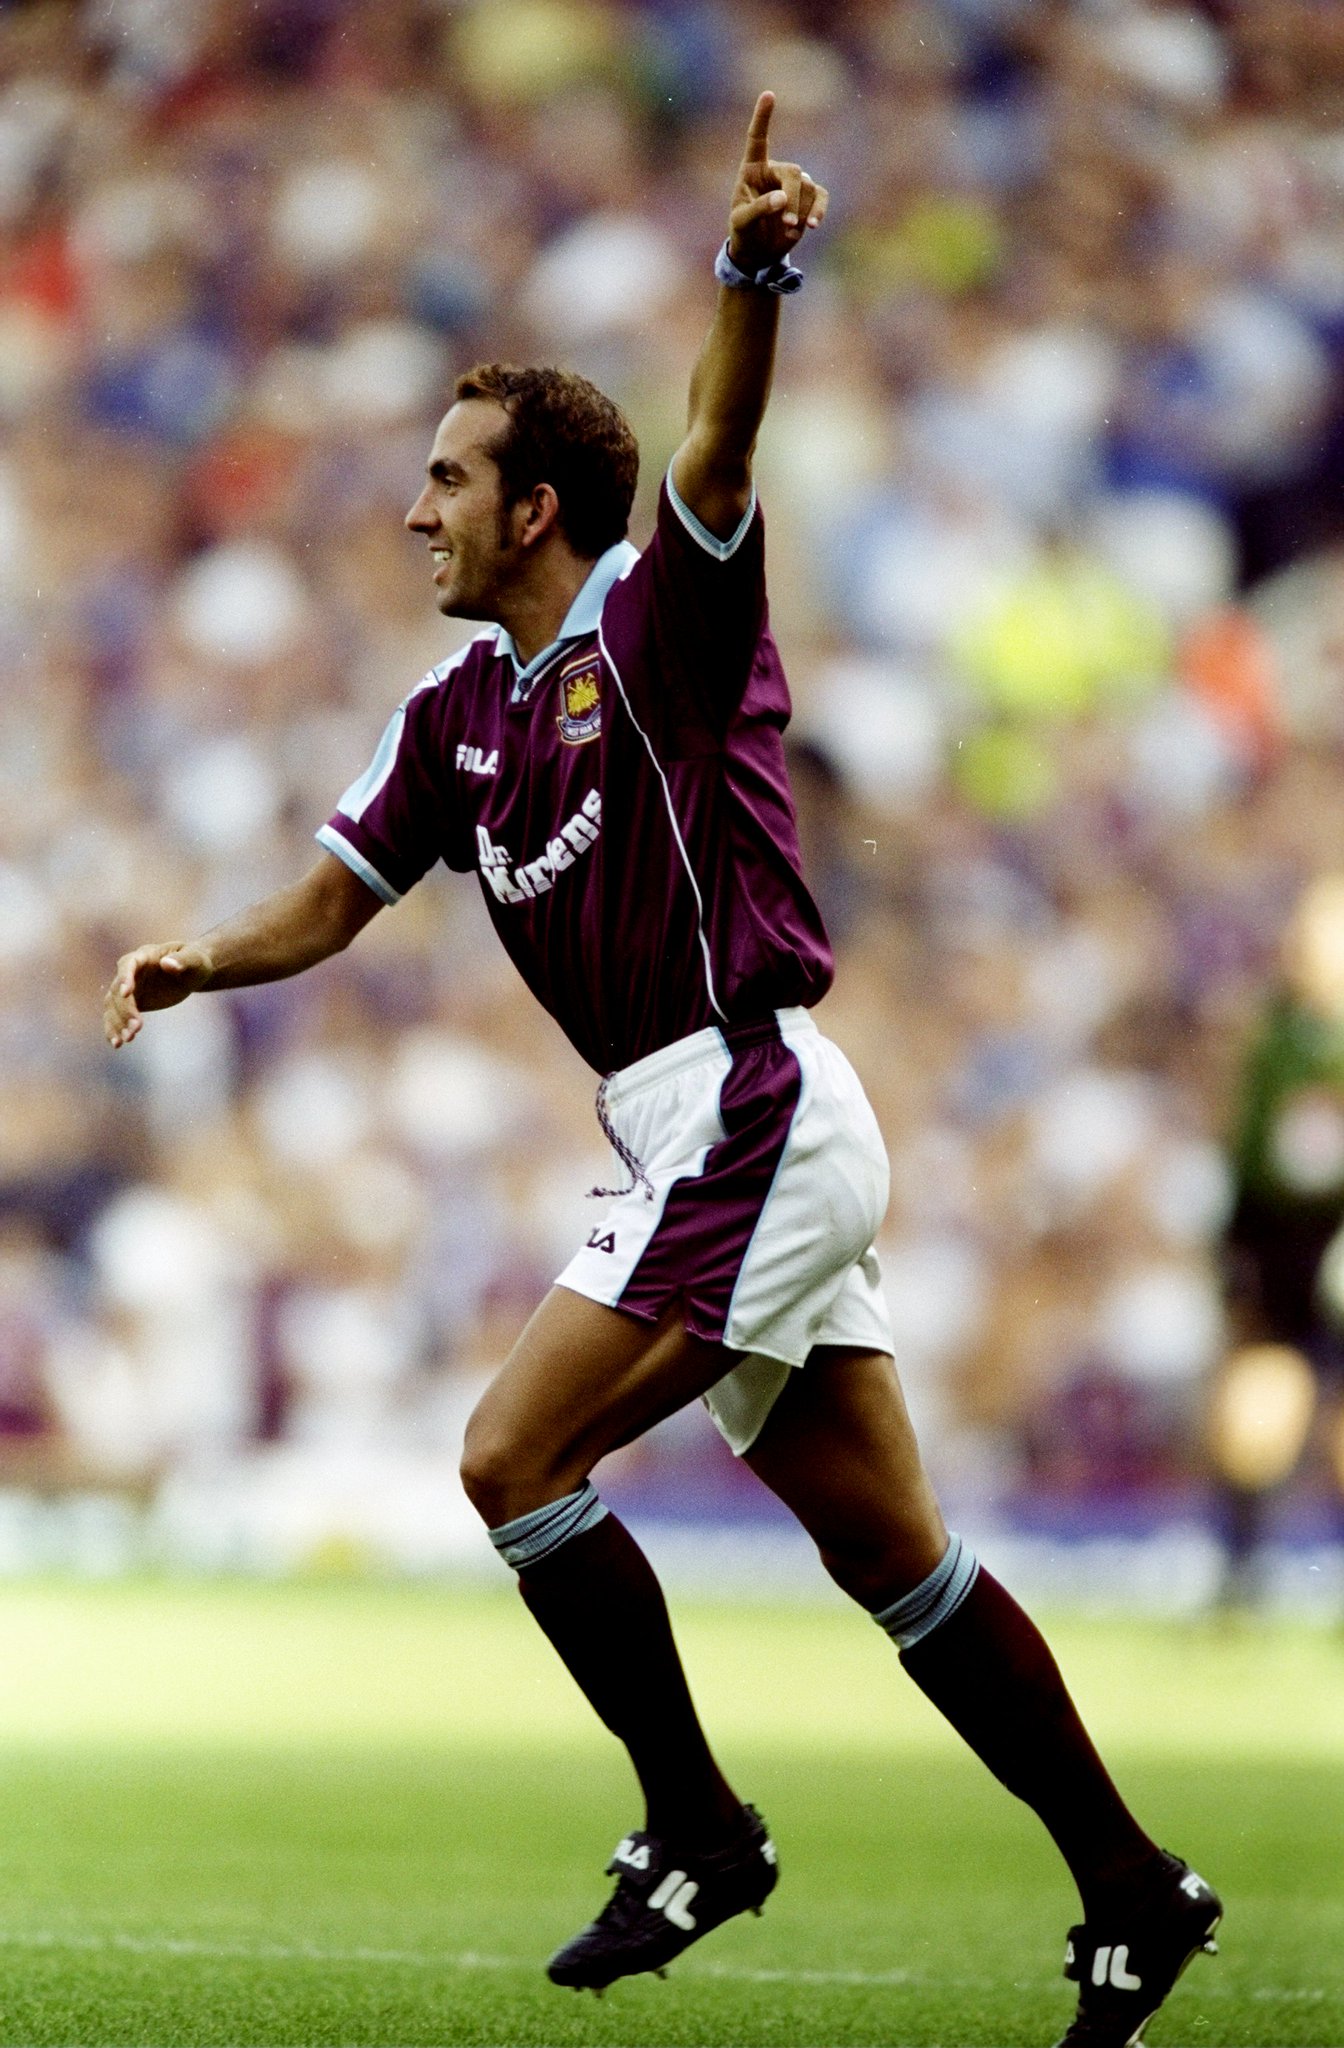 Happy 52nd Birthday to one of the clubs greatest ever players, Paolo Di Canio.

Magician    